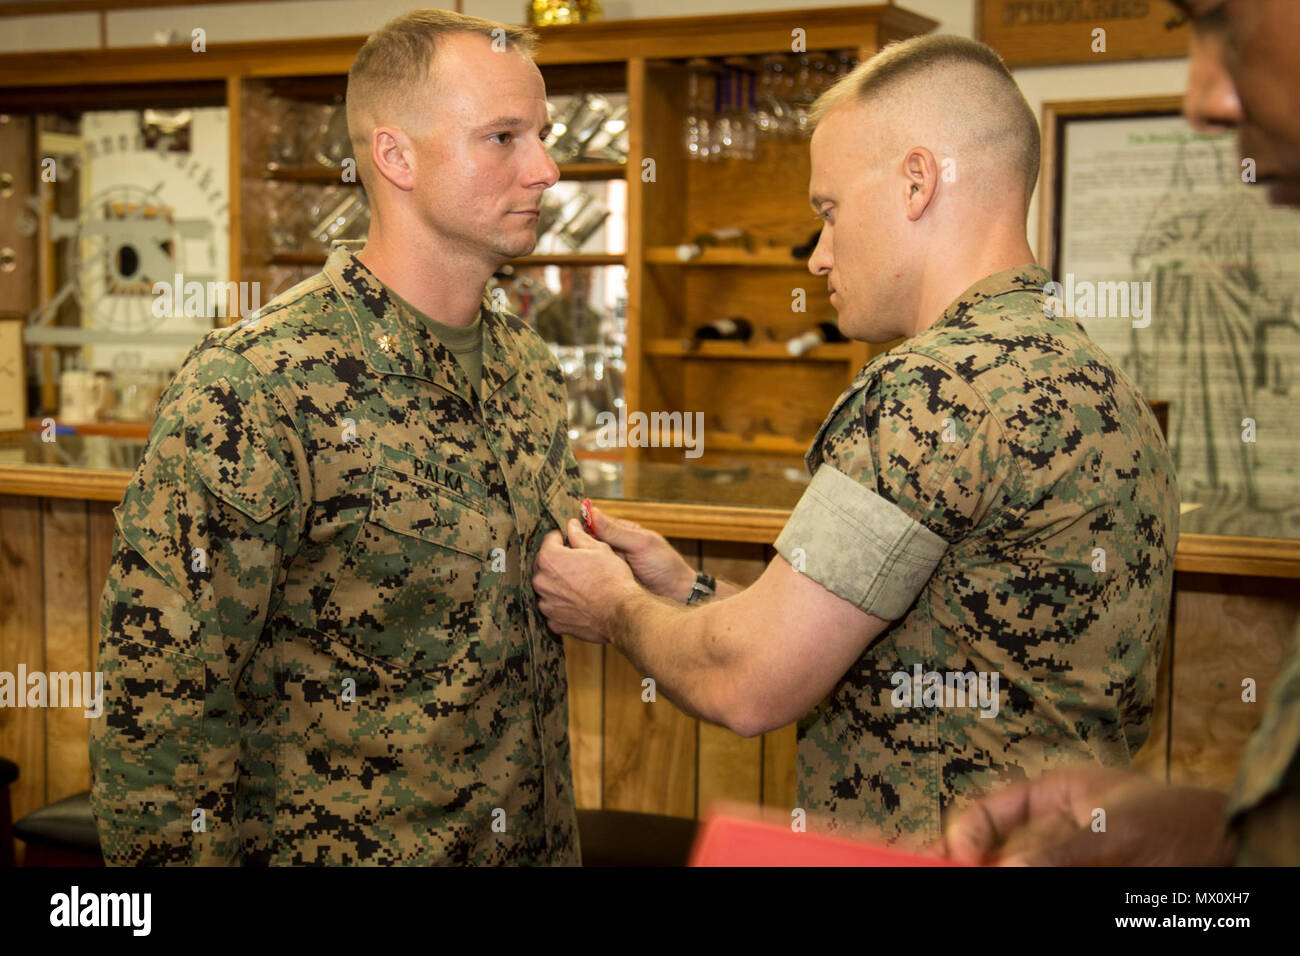 U.S. Marine Corps Maj. David J. Palka, assistant battalion inspector-instructor, 5th Battalion, 14th Marine Regiment, 4th Marine Division, is presented the Bronze Star with 'V' device for valor during a Bronze Star Presentation on Camp Pendleton, Calif., May 1, 2017.  Maj. Palka received the Bronze Star for heroic service in connection with combat operations against the enemy while serving as a Commander, Battery E, Battalion Landing Team, 2nd Battalion 6th Marine Regiment, 26th Marine Expeditionary Unit, in support of Operation Inherent Resolve from 12 March to 25 May 2016. Stock Photo